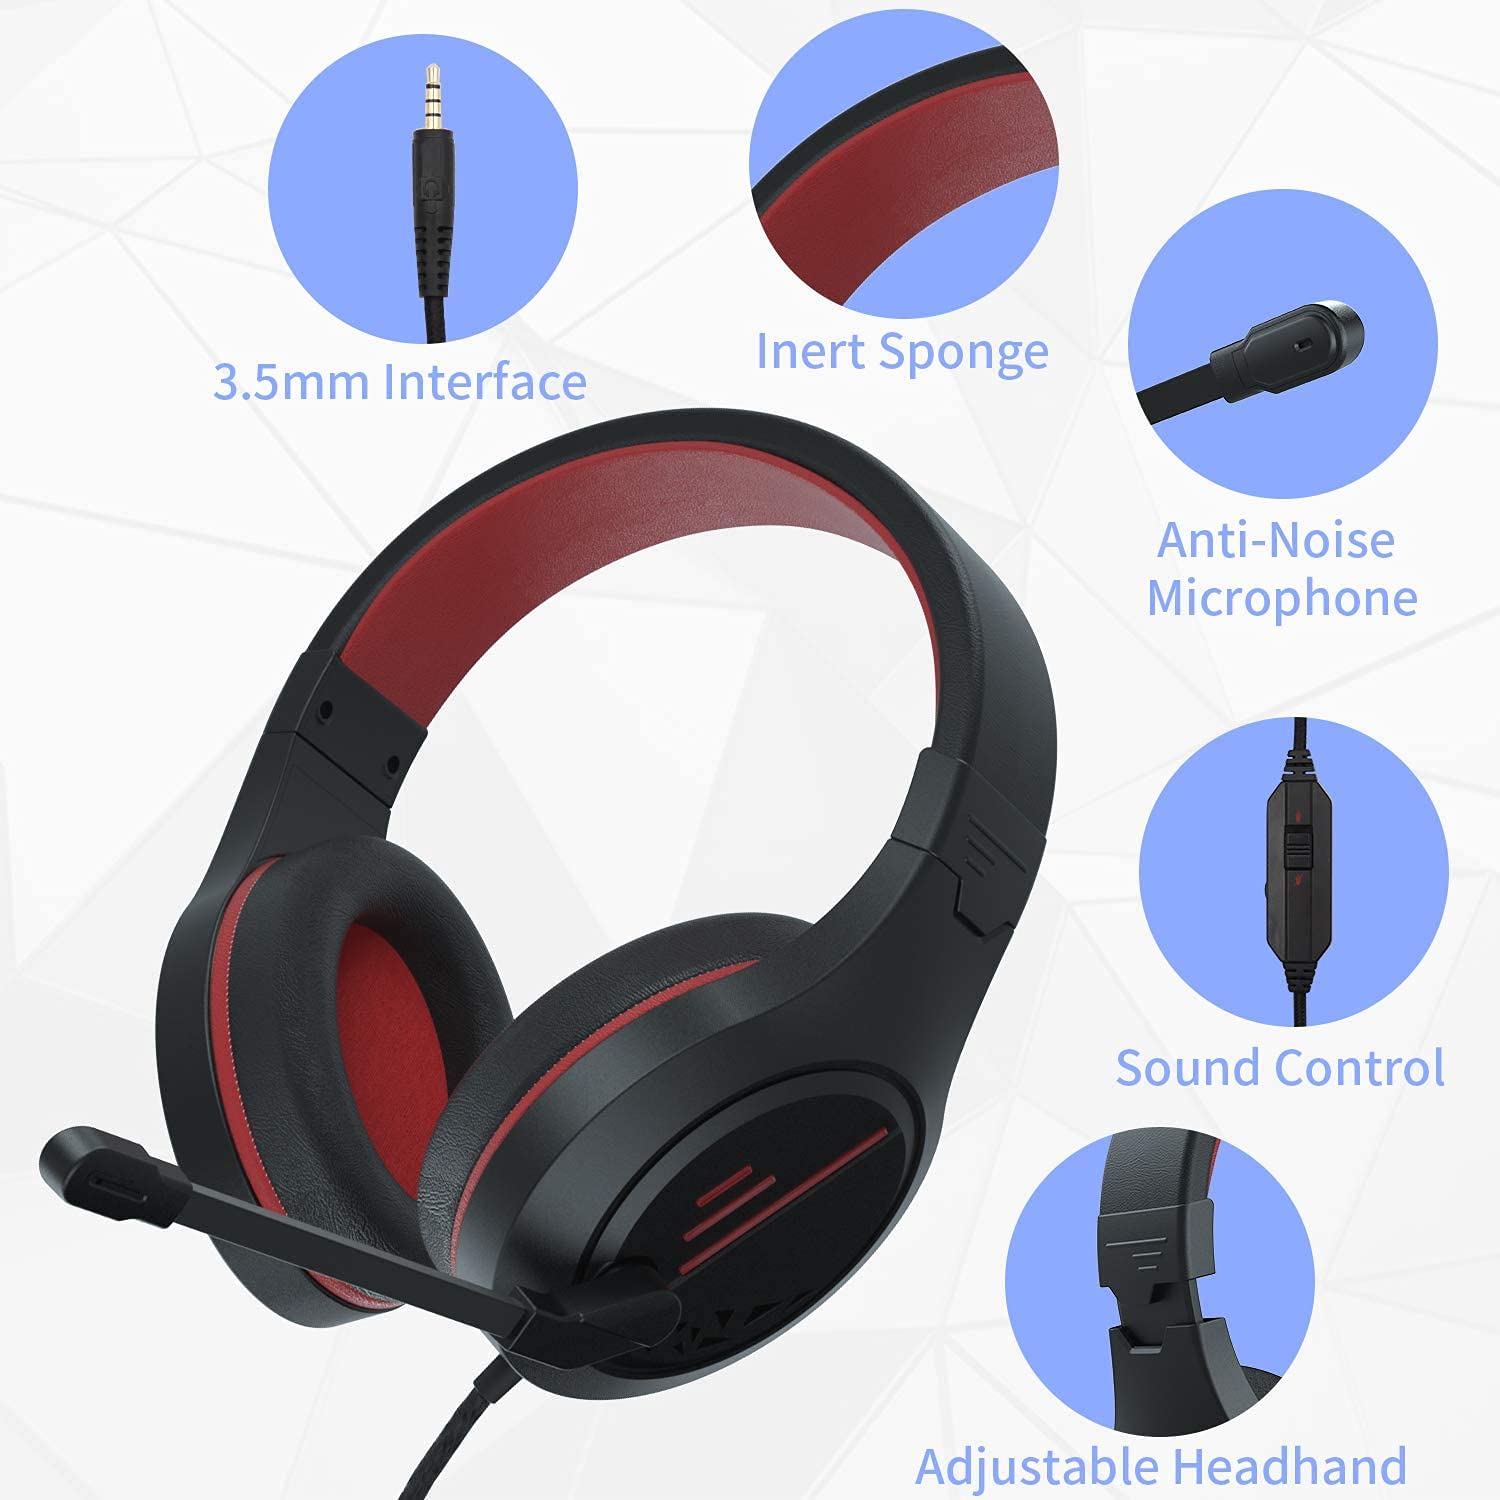 Anivia MH601 Headphones with Microphone LED Wired Headset with Active Noise Canceling Microphone, 3.5mm Audio Jack Stereo Headphone - Red (Game/Work/School)